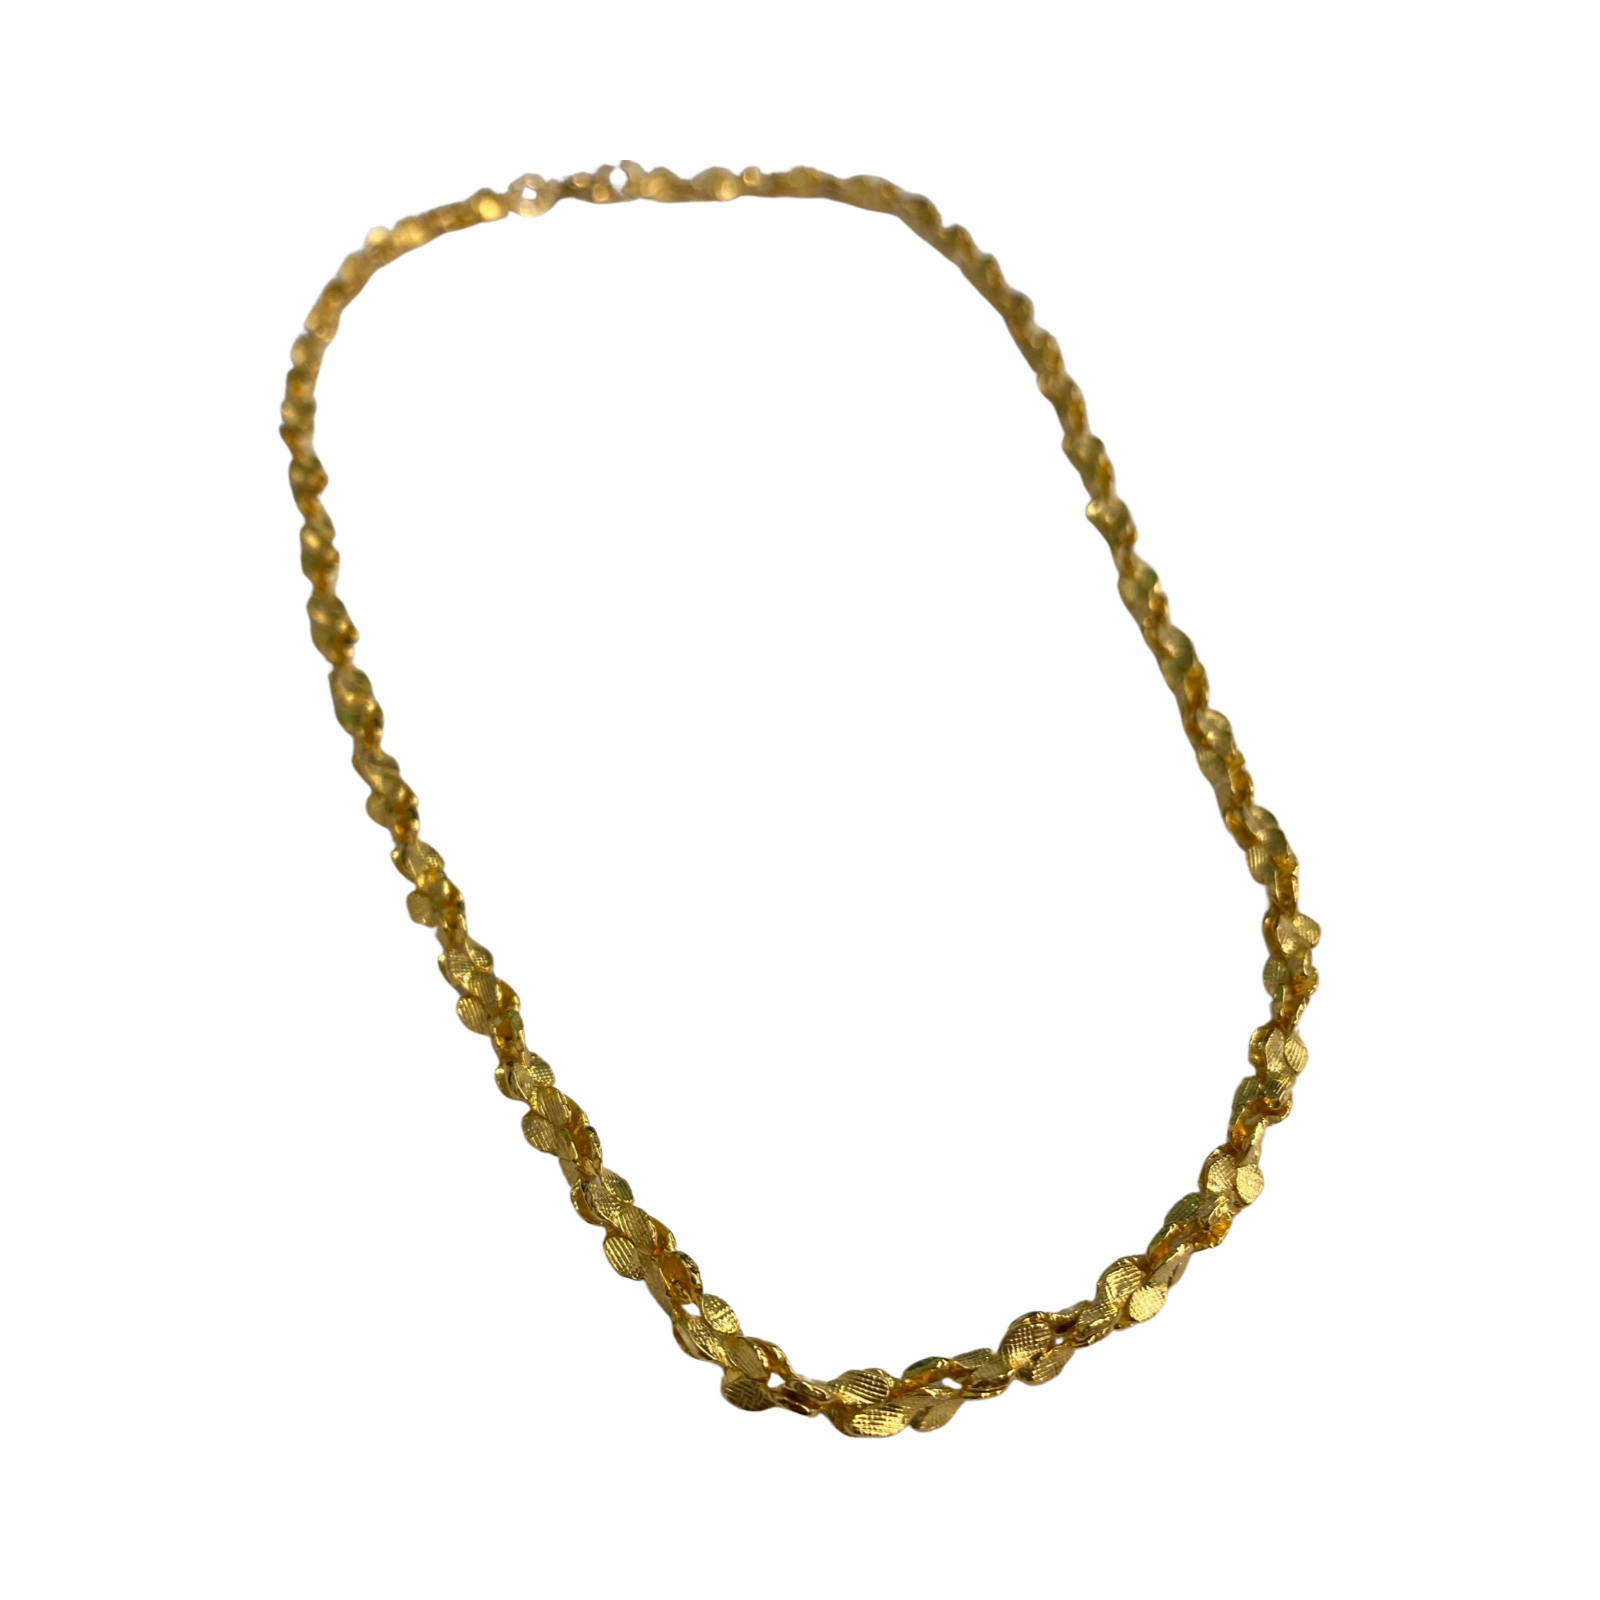 Textured Chain Link Short Necklace